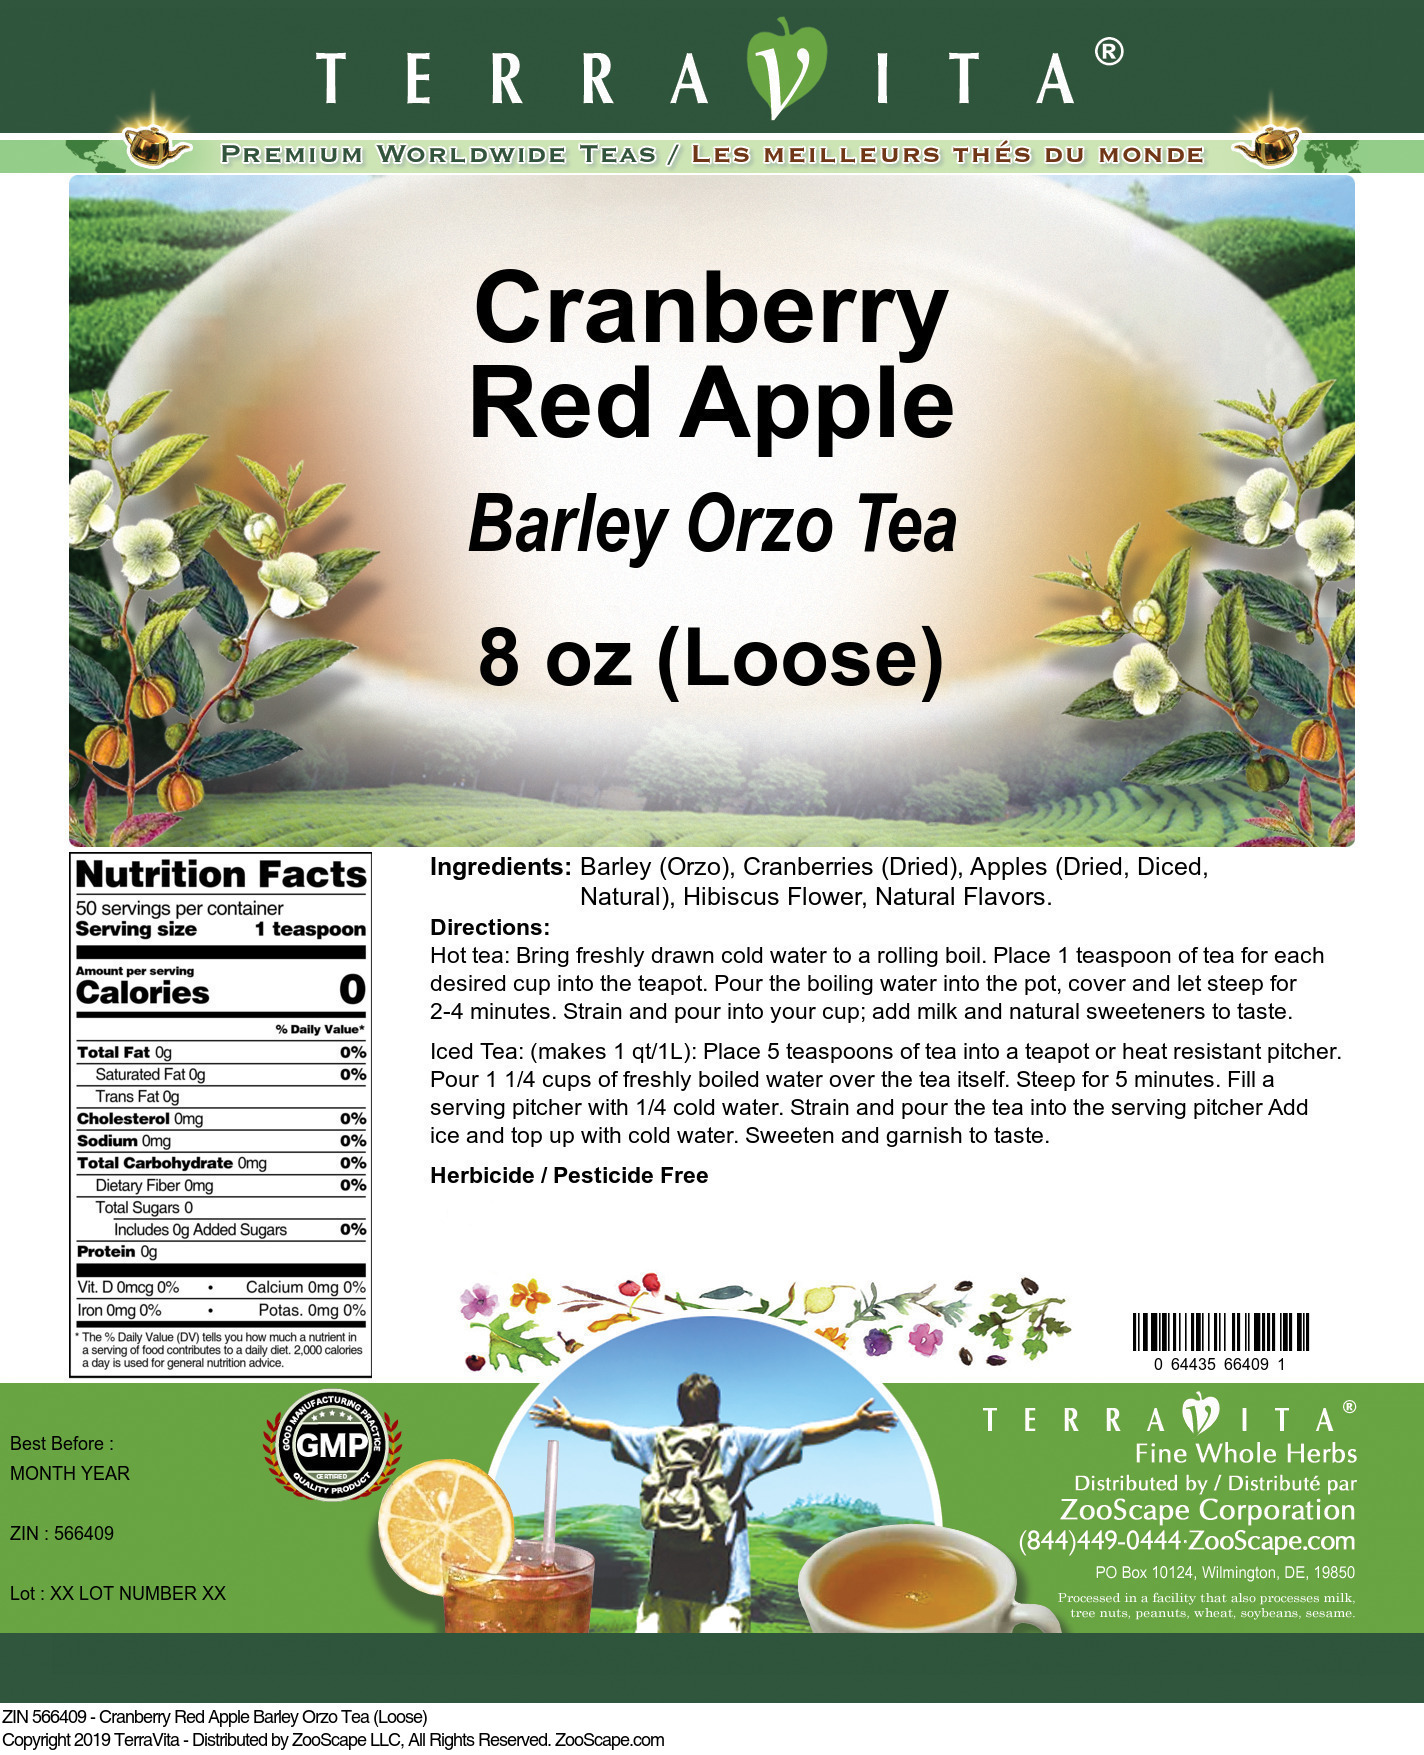 Cranberry Red Apple Barley Orzo Tea (Loose) - Label